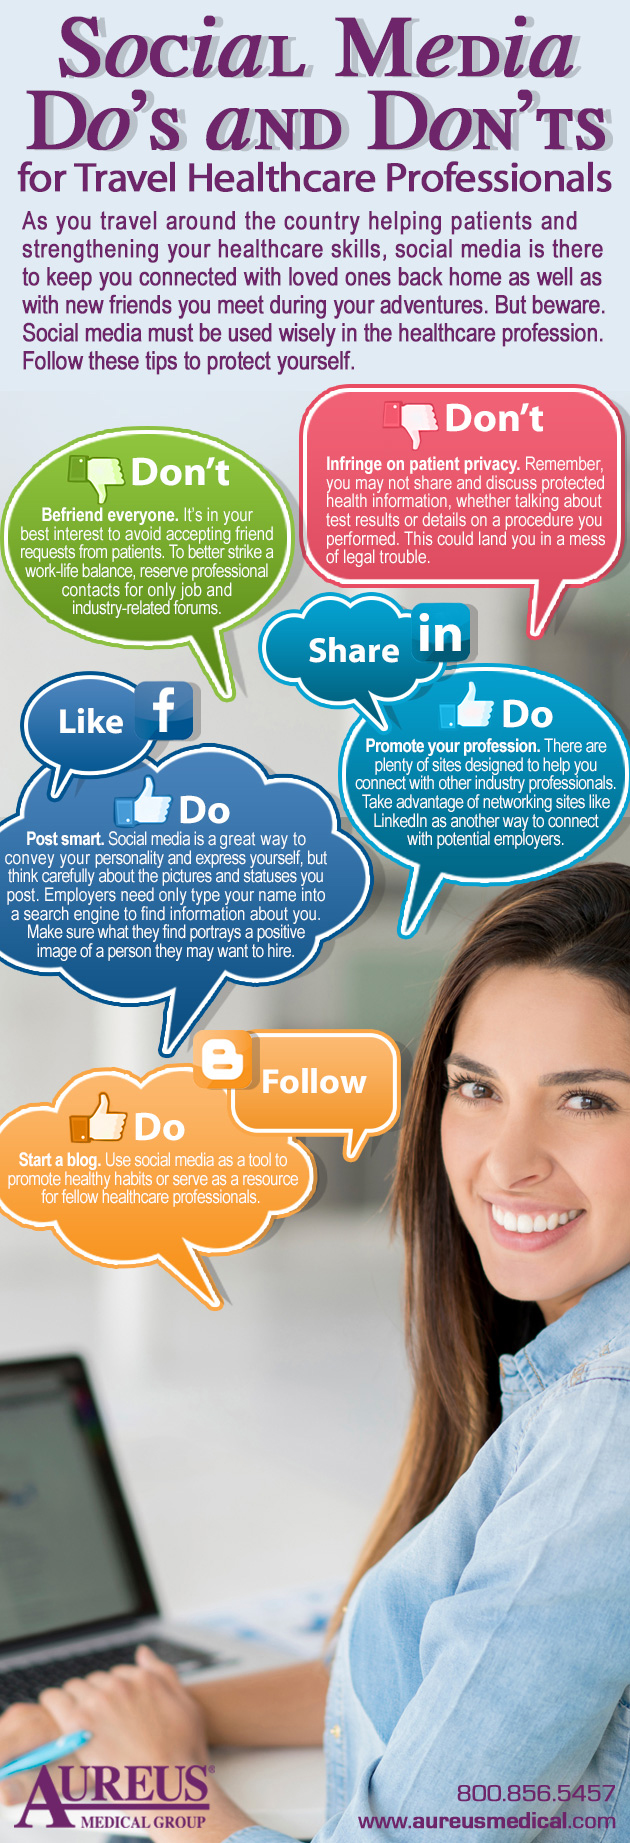 Social Media Do’s and Don’ts for Travel Healthcare Professionals